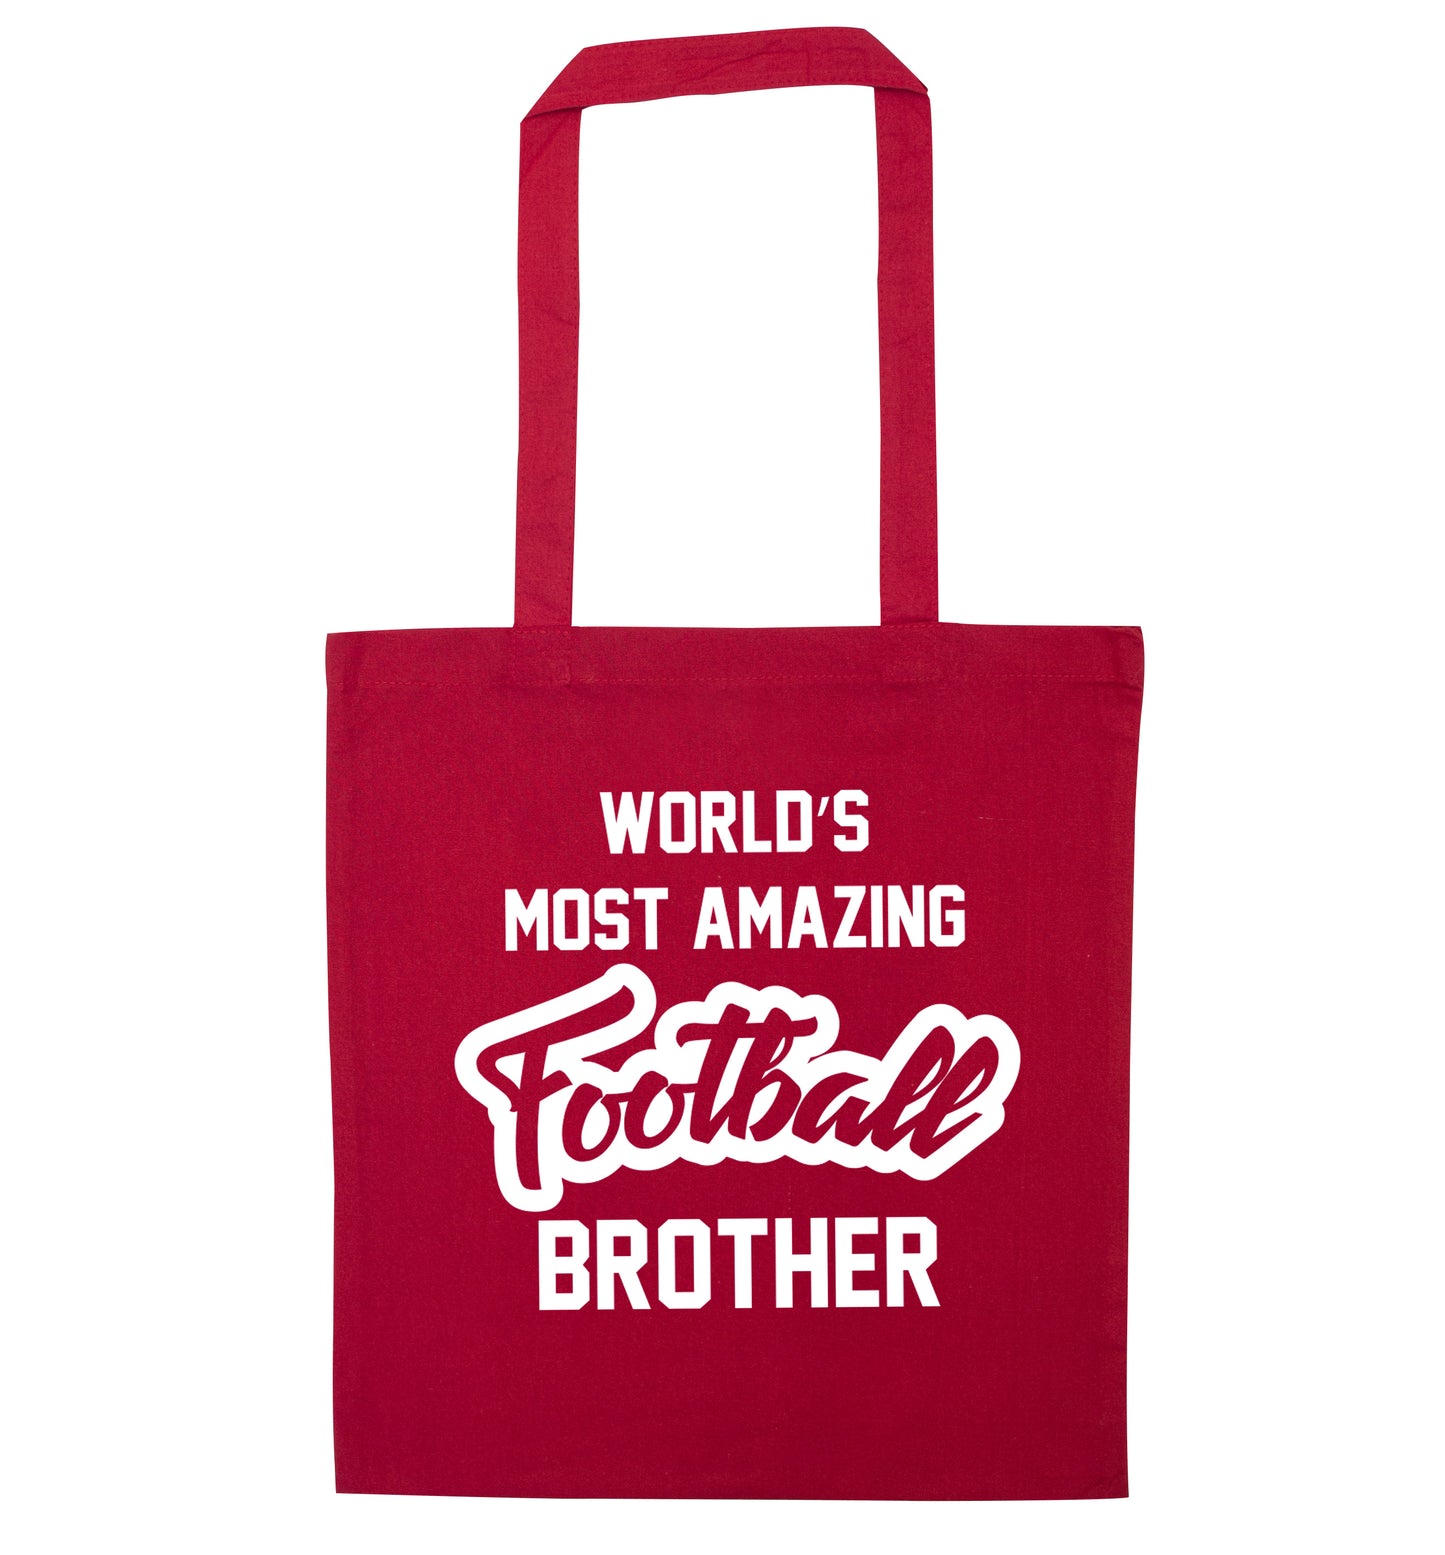 Worlds most amazing football brother red tote bag